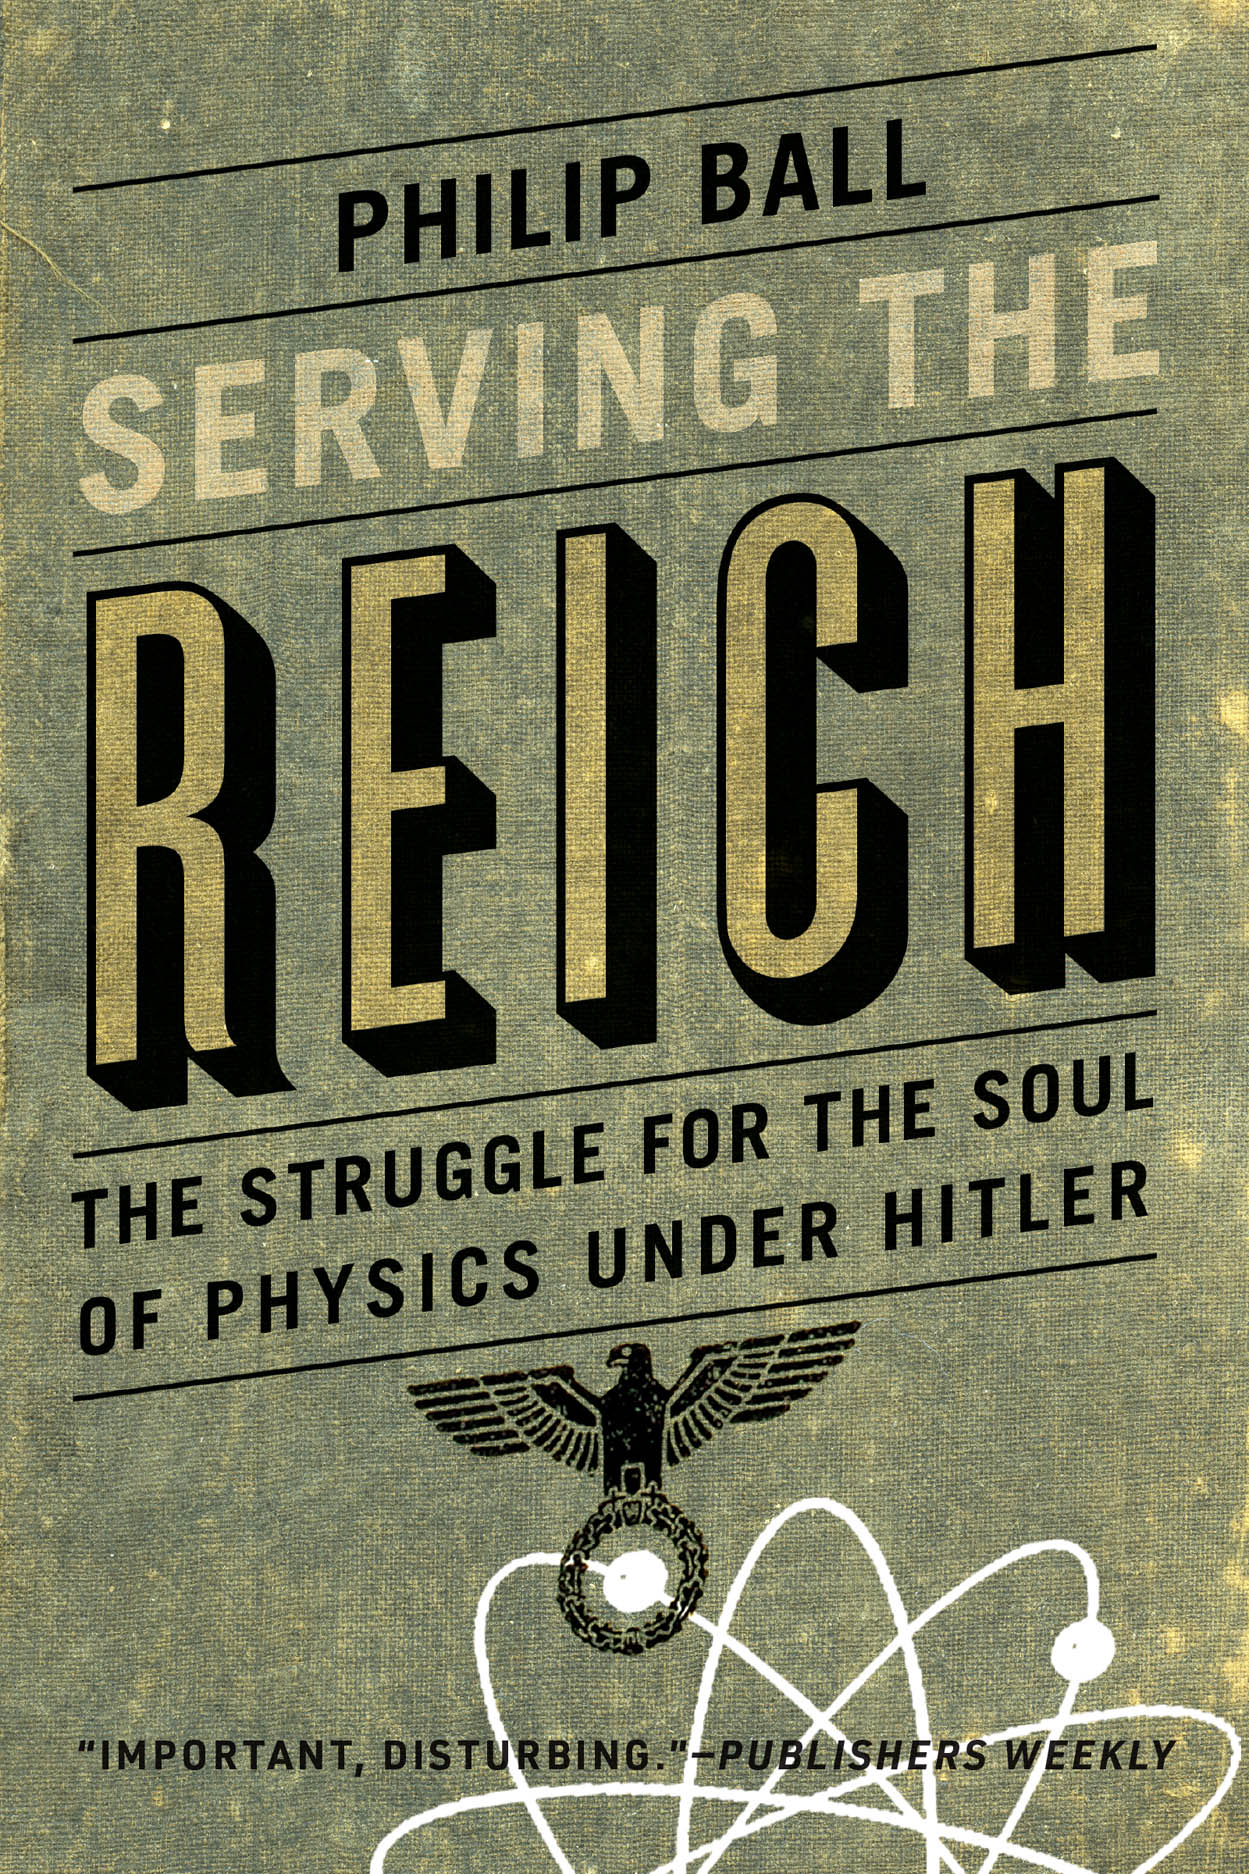 Serving the Reich: The Struggle for the Soul of Physics under Hitler